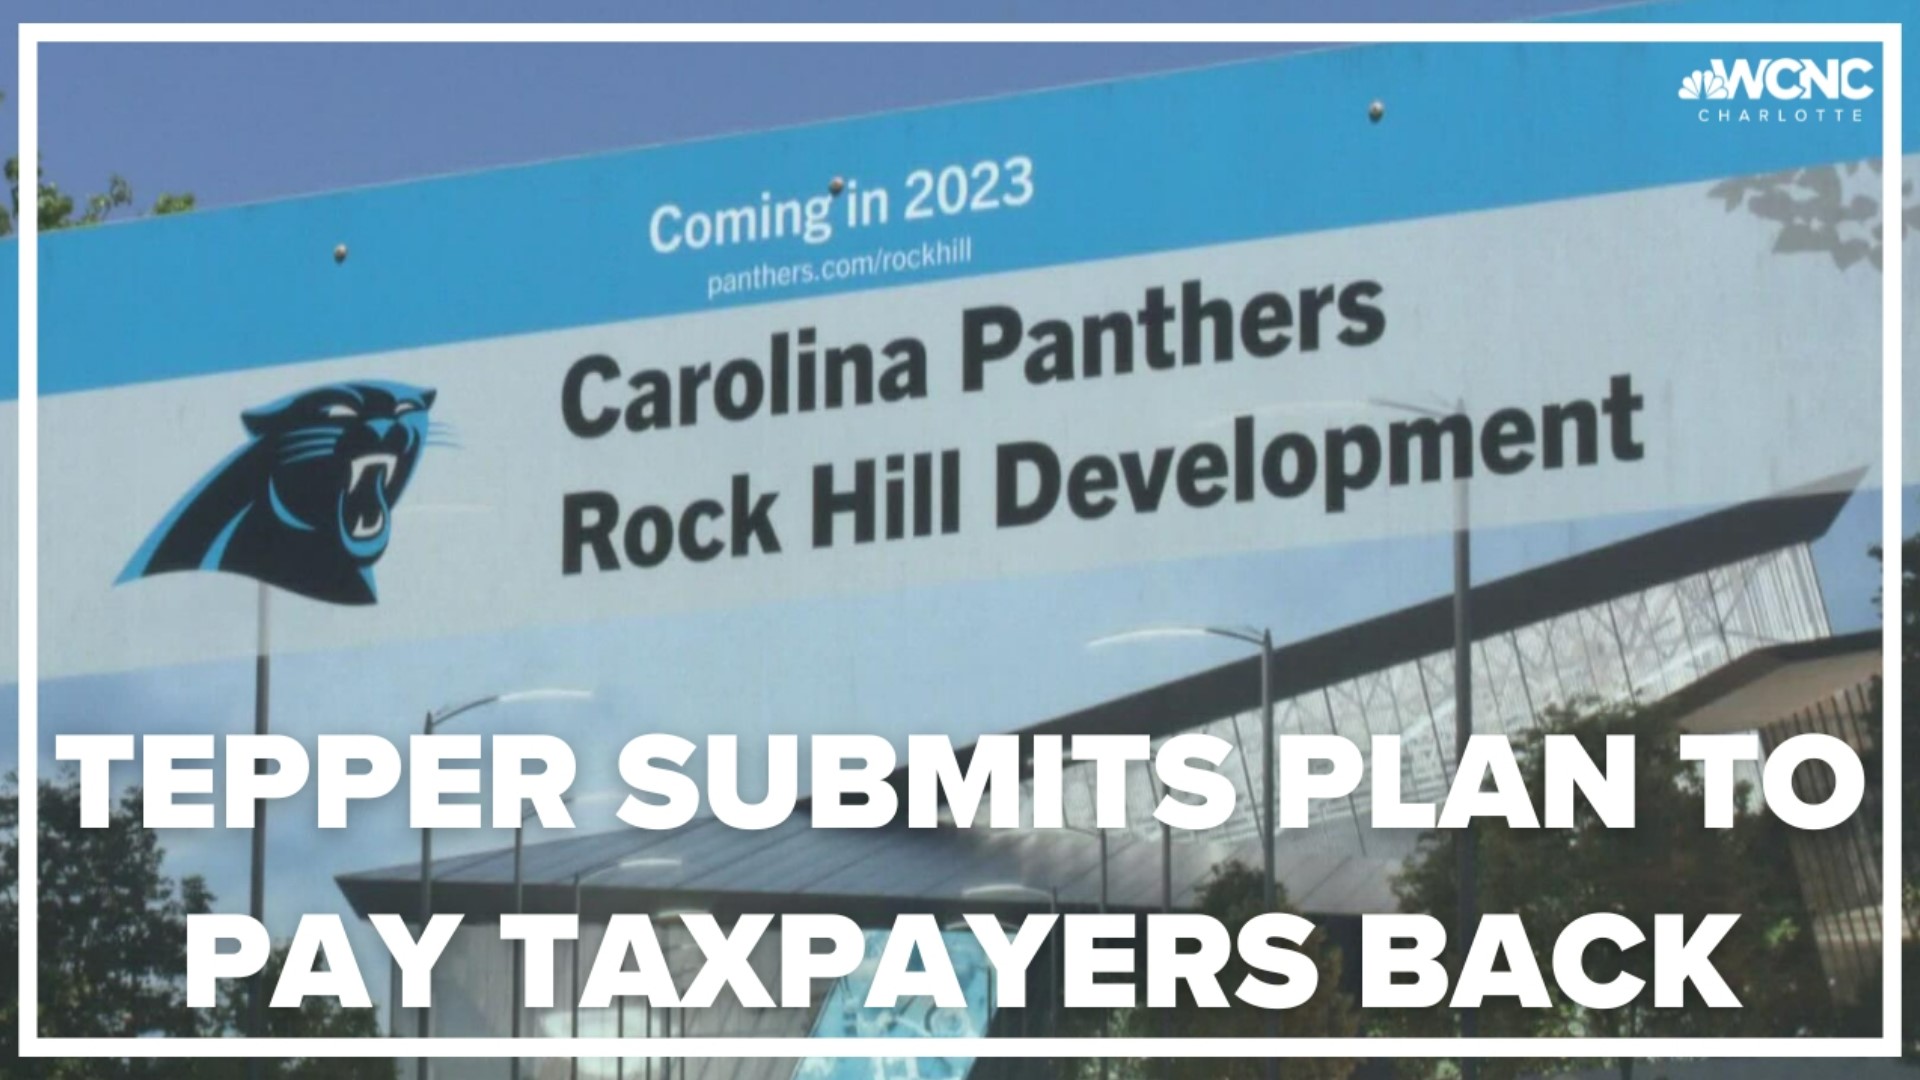 The company behind the failed project has submitted a plan to pay back taxpayers and contractors